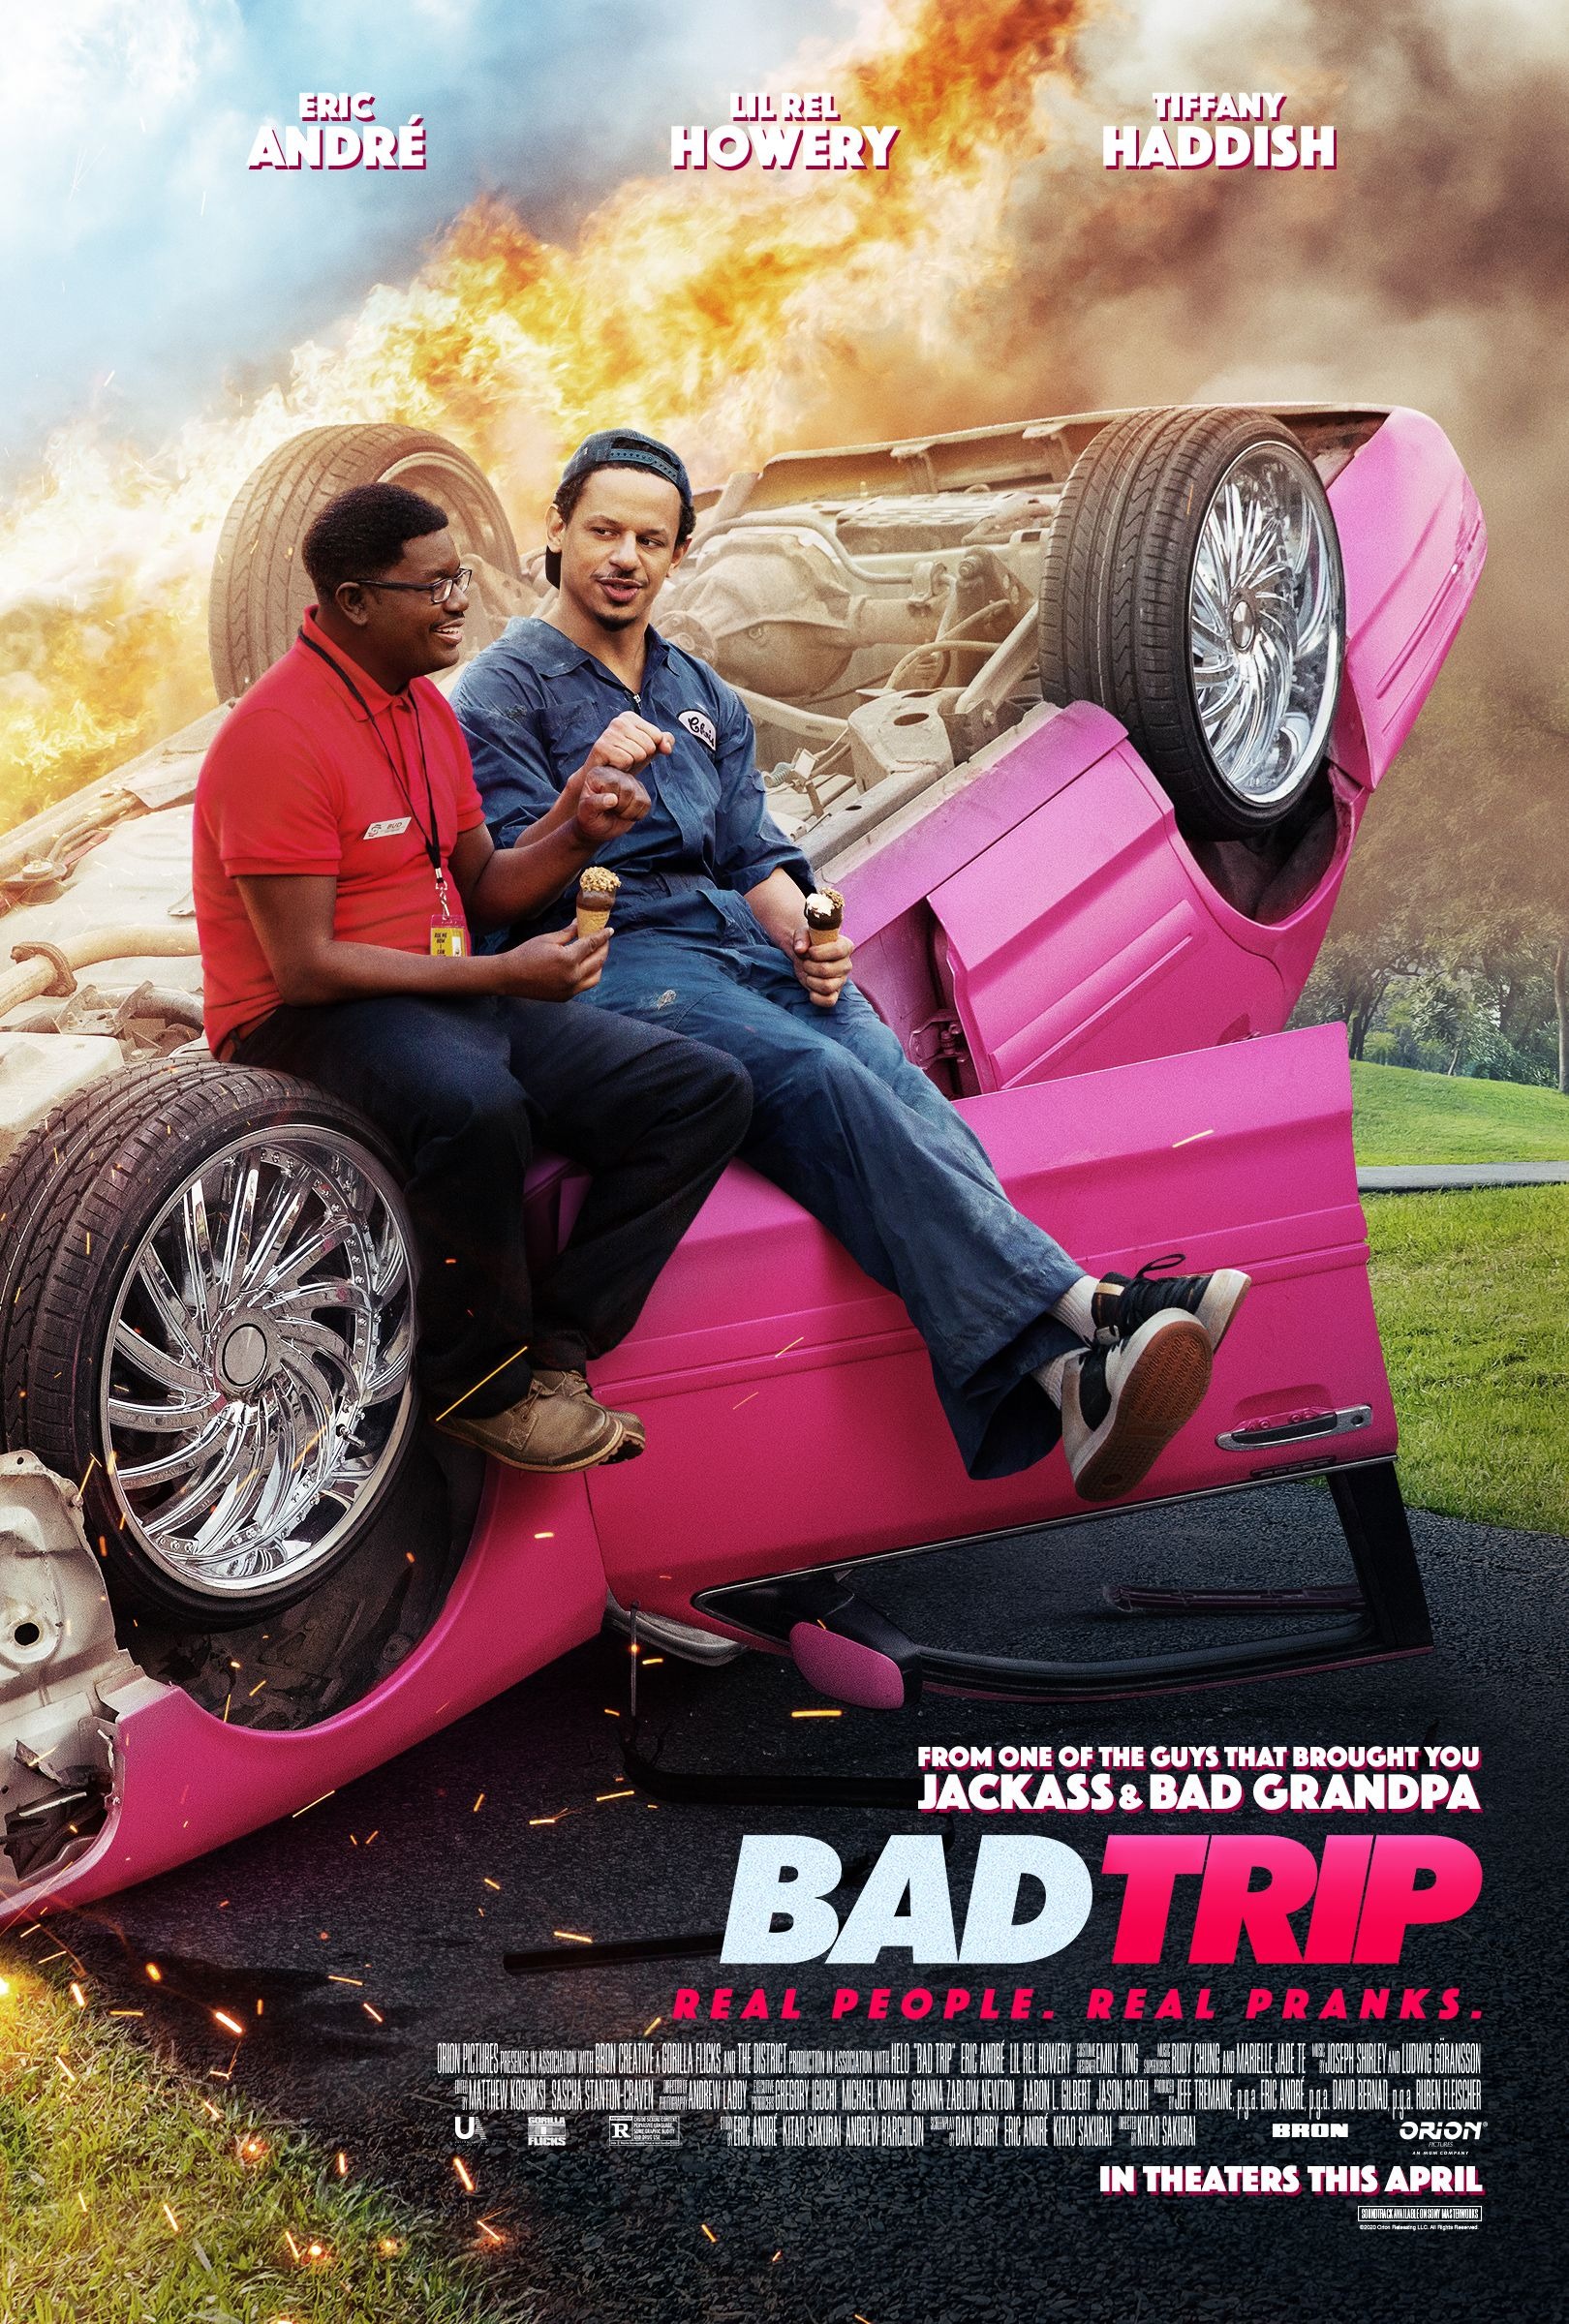 Movie Trailer 'Bad Trip' [Starring Eric Andre, Lil Rel Howery, Tiffany